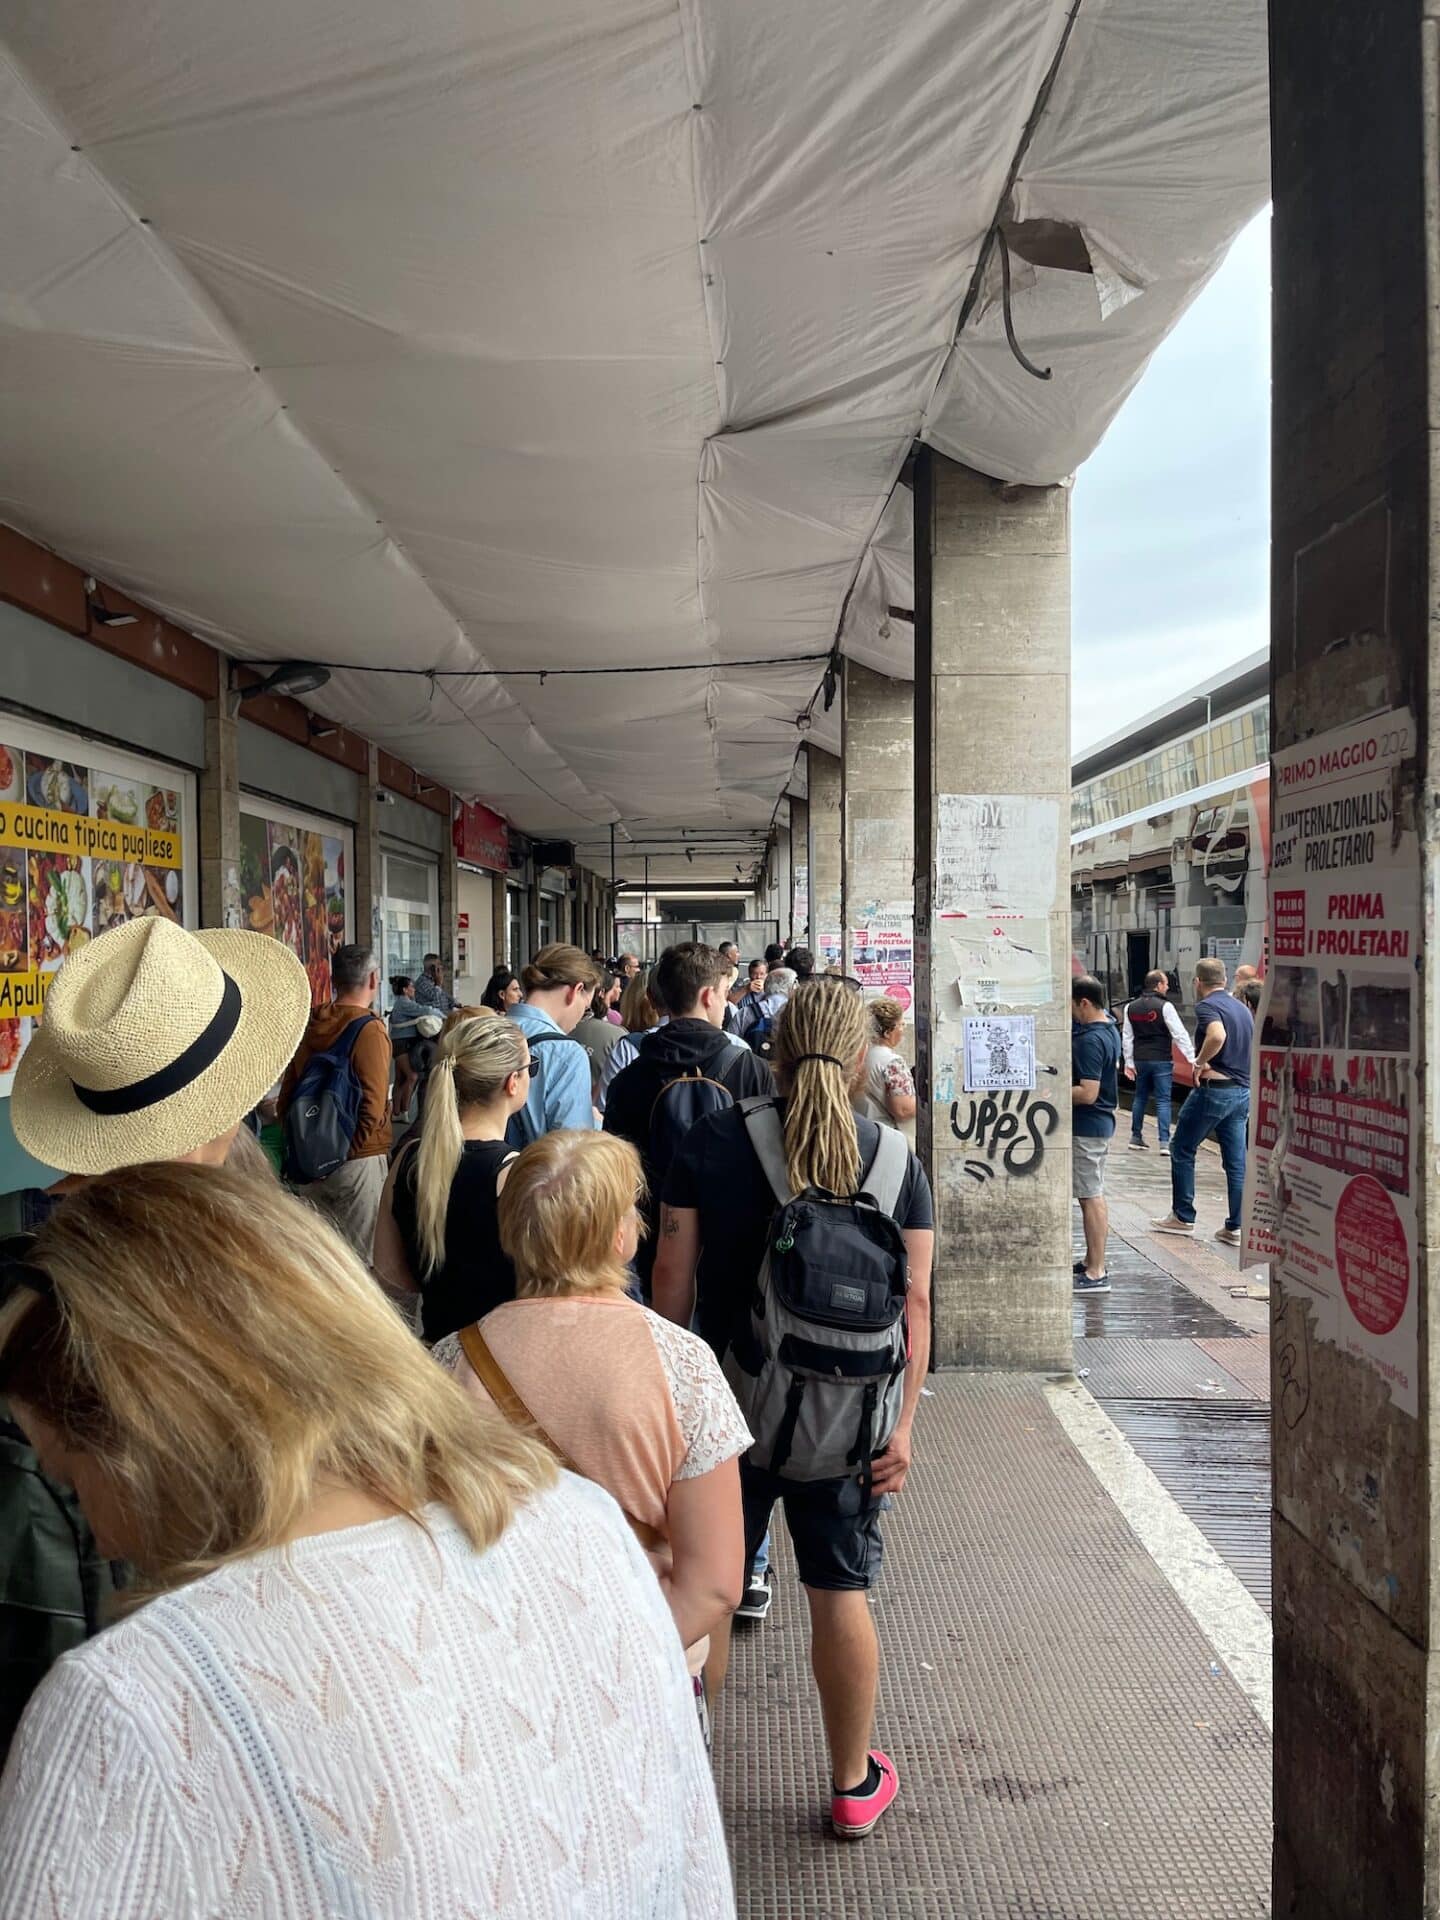 A long queue of people waiting under a covered walkway in Bari, Italy. The crowd consists of tourists and locals, some with backpacks, waiting patiently. The surrounding area has posters and advertisements on the walls.